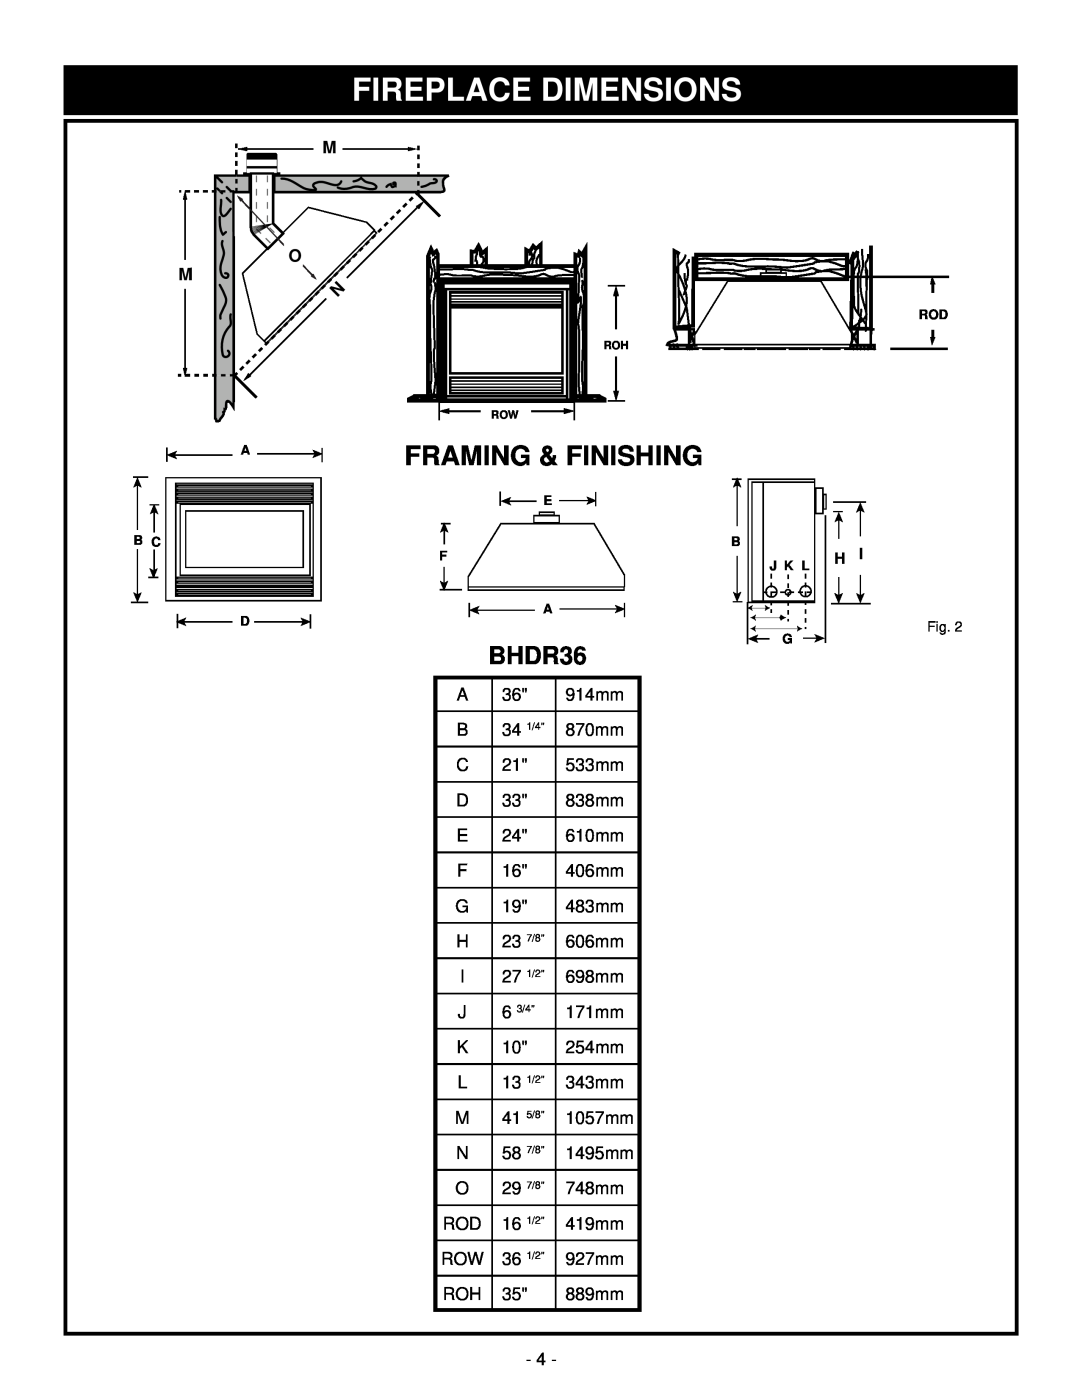 Vermont Casting BHDR36 installation instructions Fireplace Dimensions, Framing & Finishing 